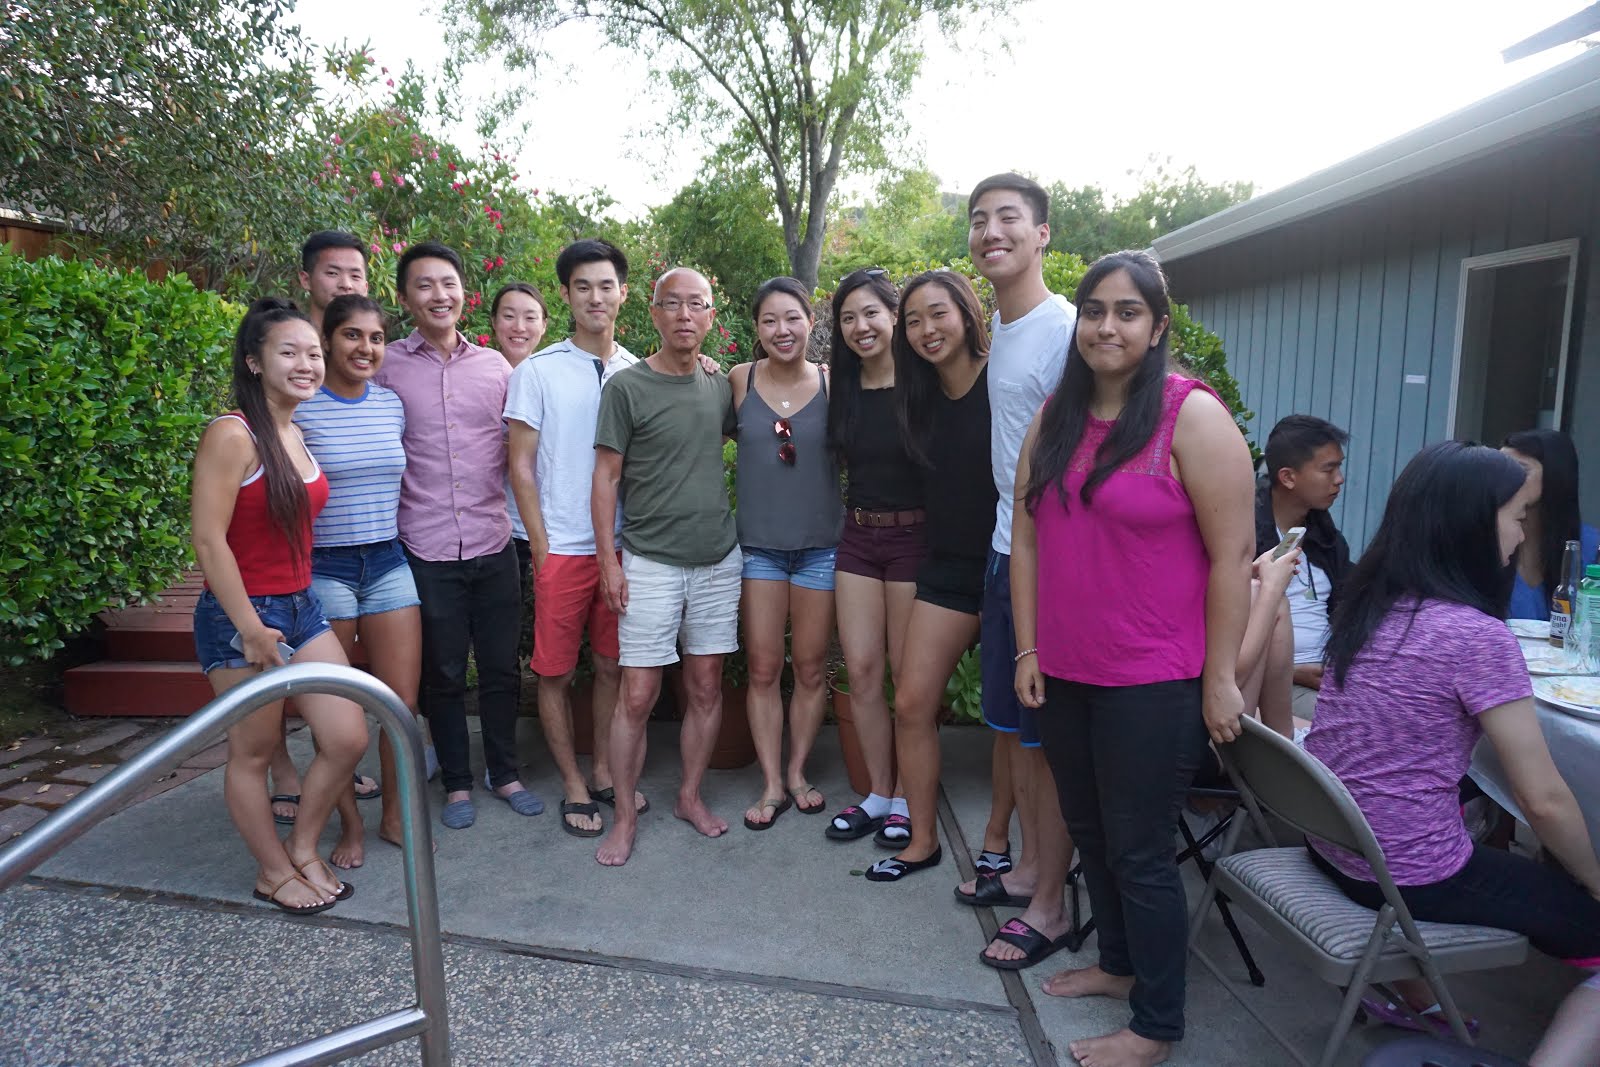 2018 Summer party at Erica's